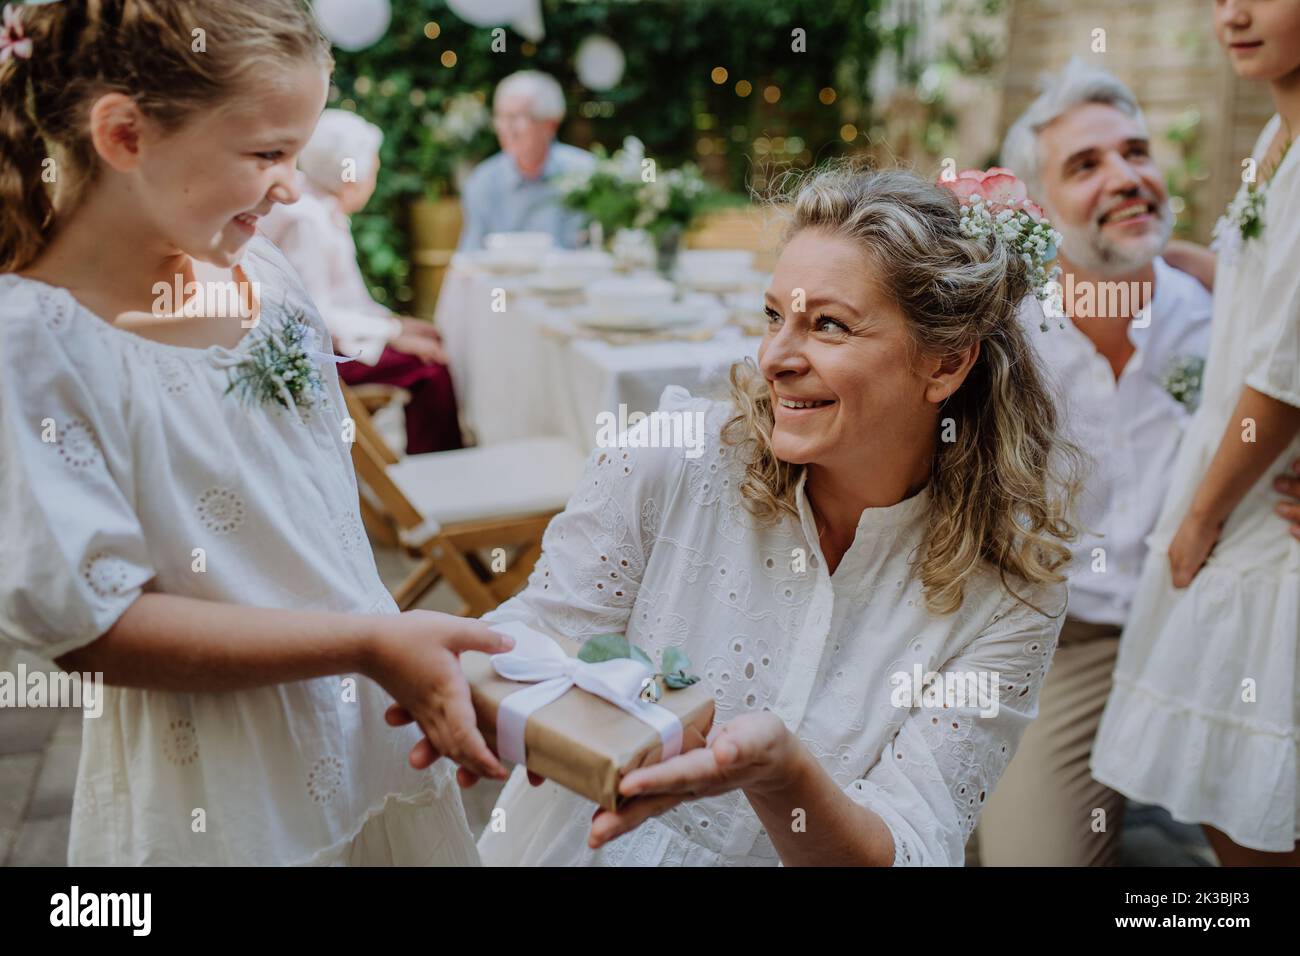 Little girl giving wedding gift to mature bride at wedding backyard party. Stock Photo